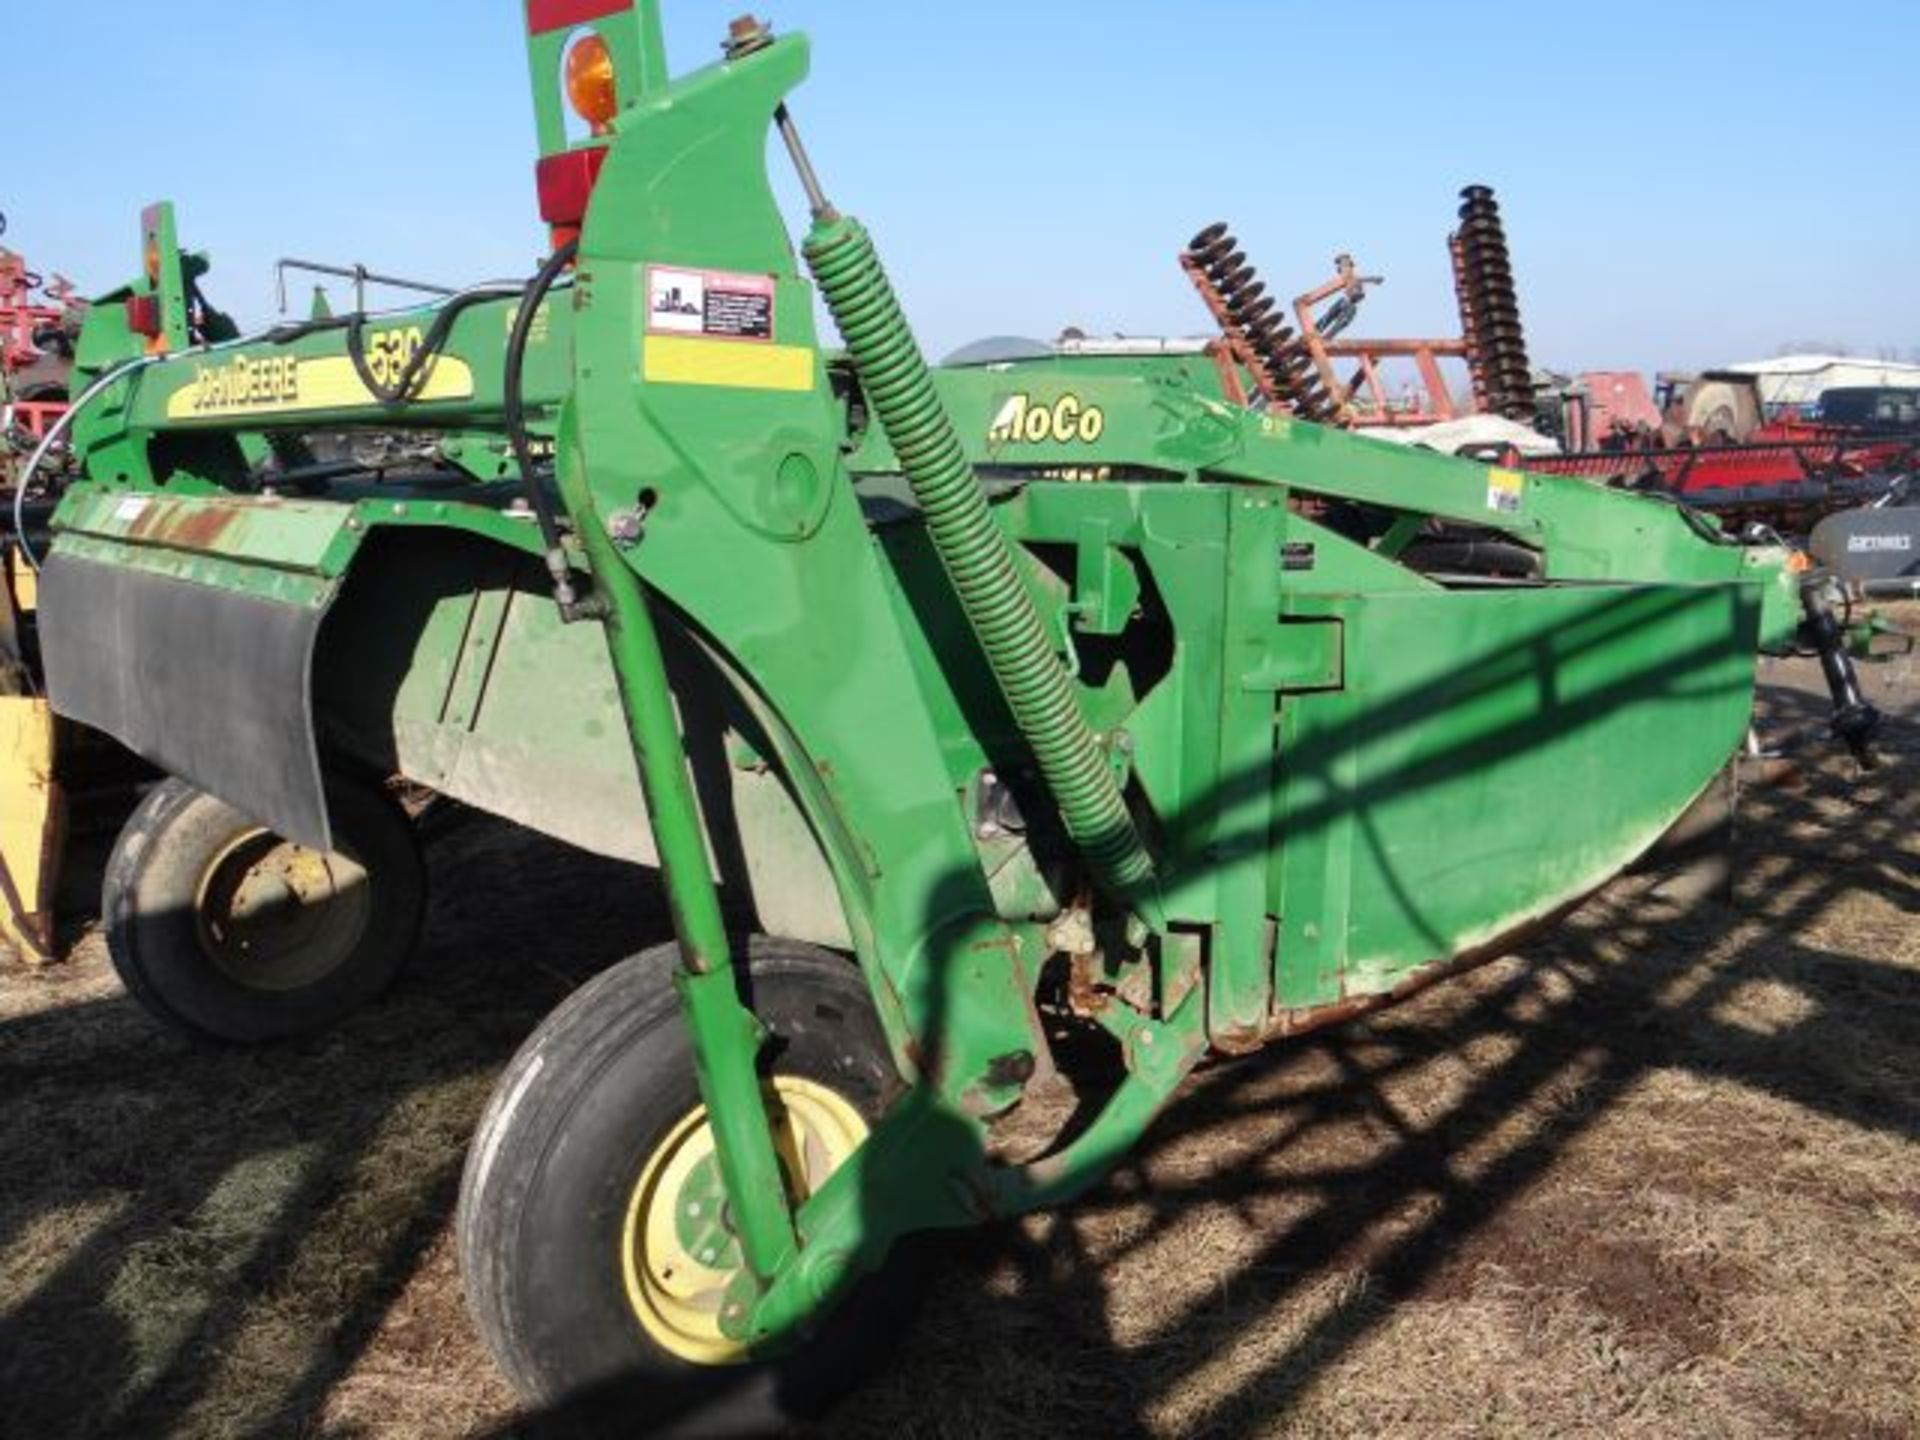 JD 530 MoCo, 2007 #65317, MOCO Side pull:9'9 cut, impeller conditioner, clevis hitch, single CV - Image 2 of 4